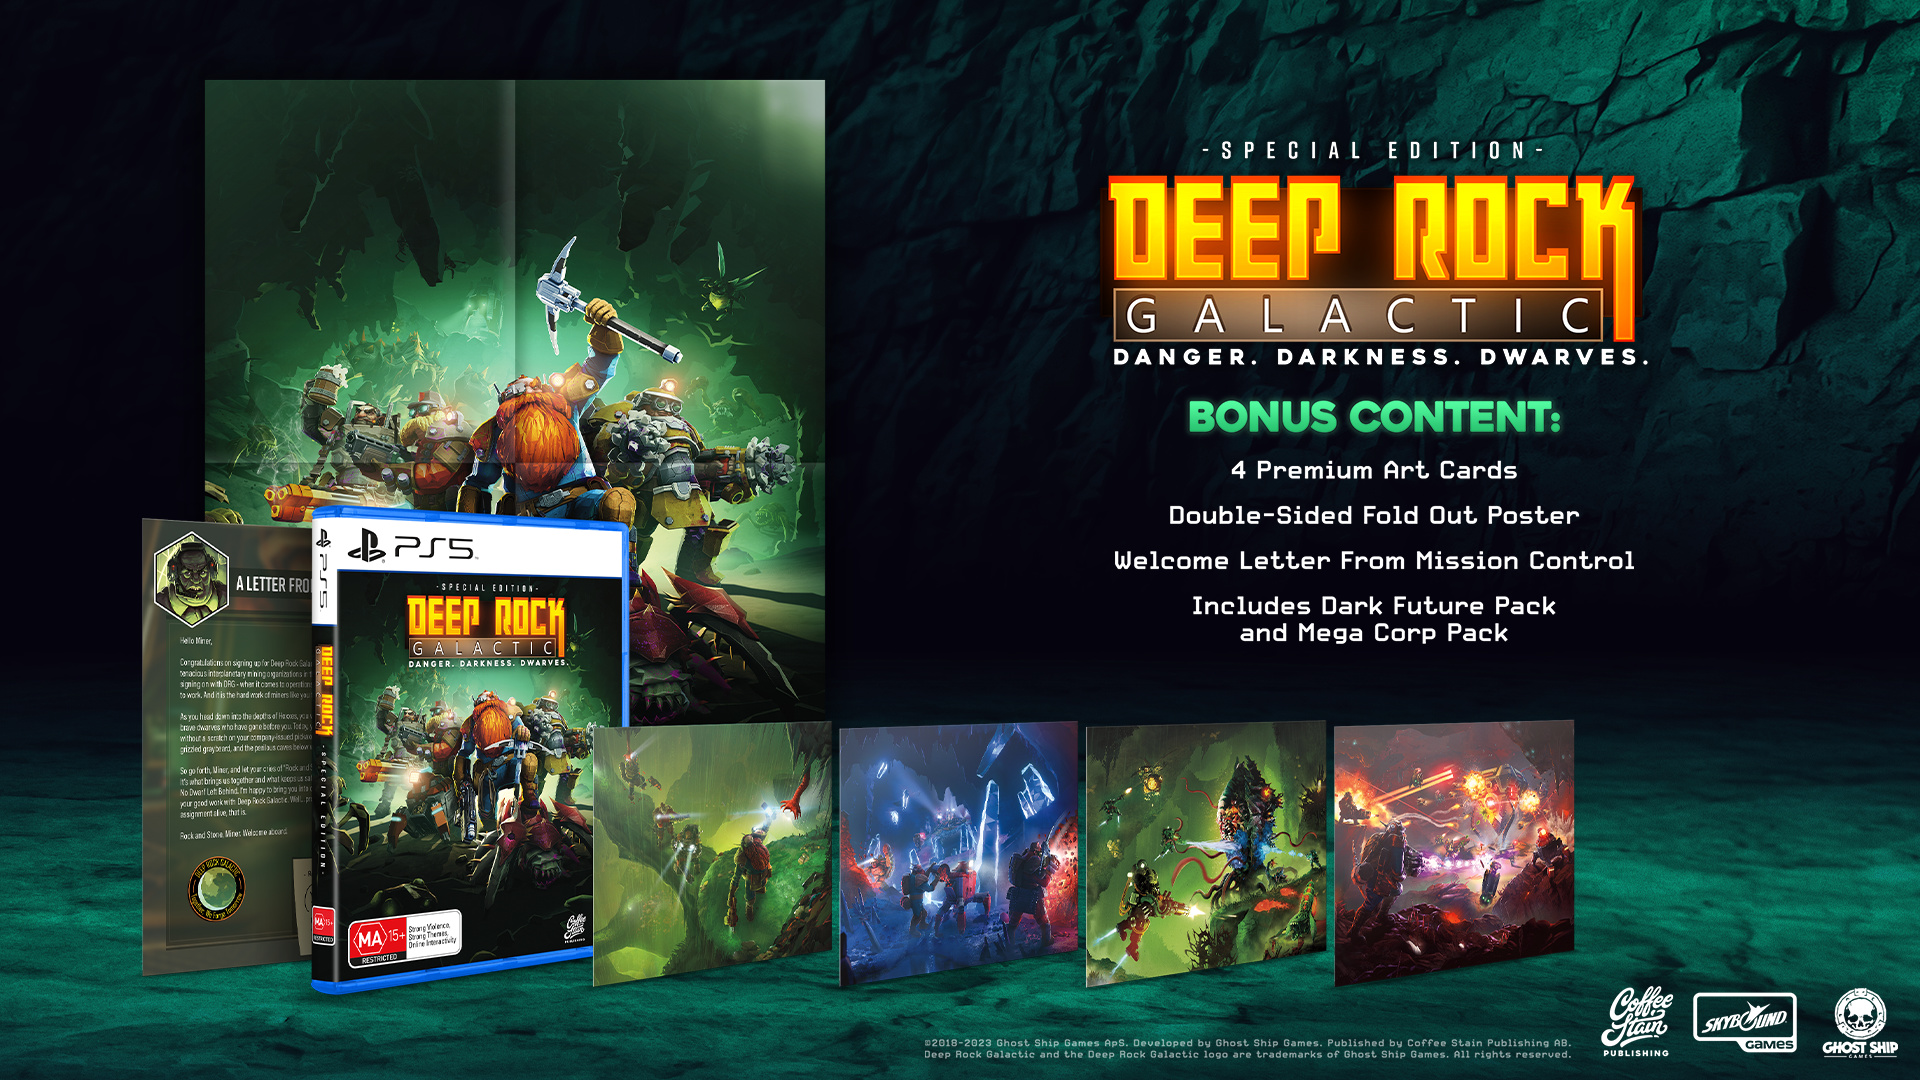 Ready go to ... https://deeprockgalactic.skybound.com/ [ Deep Rock Galactic: Special Edition]